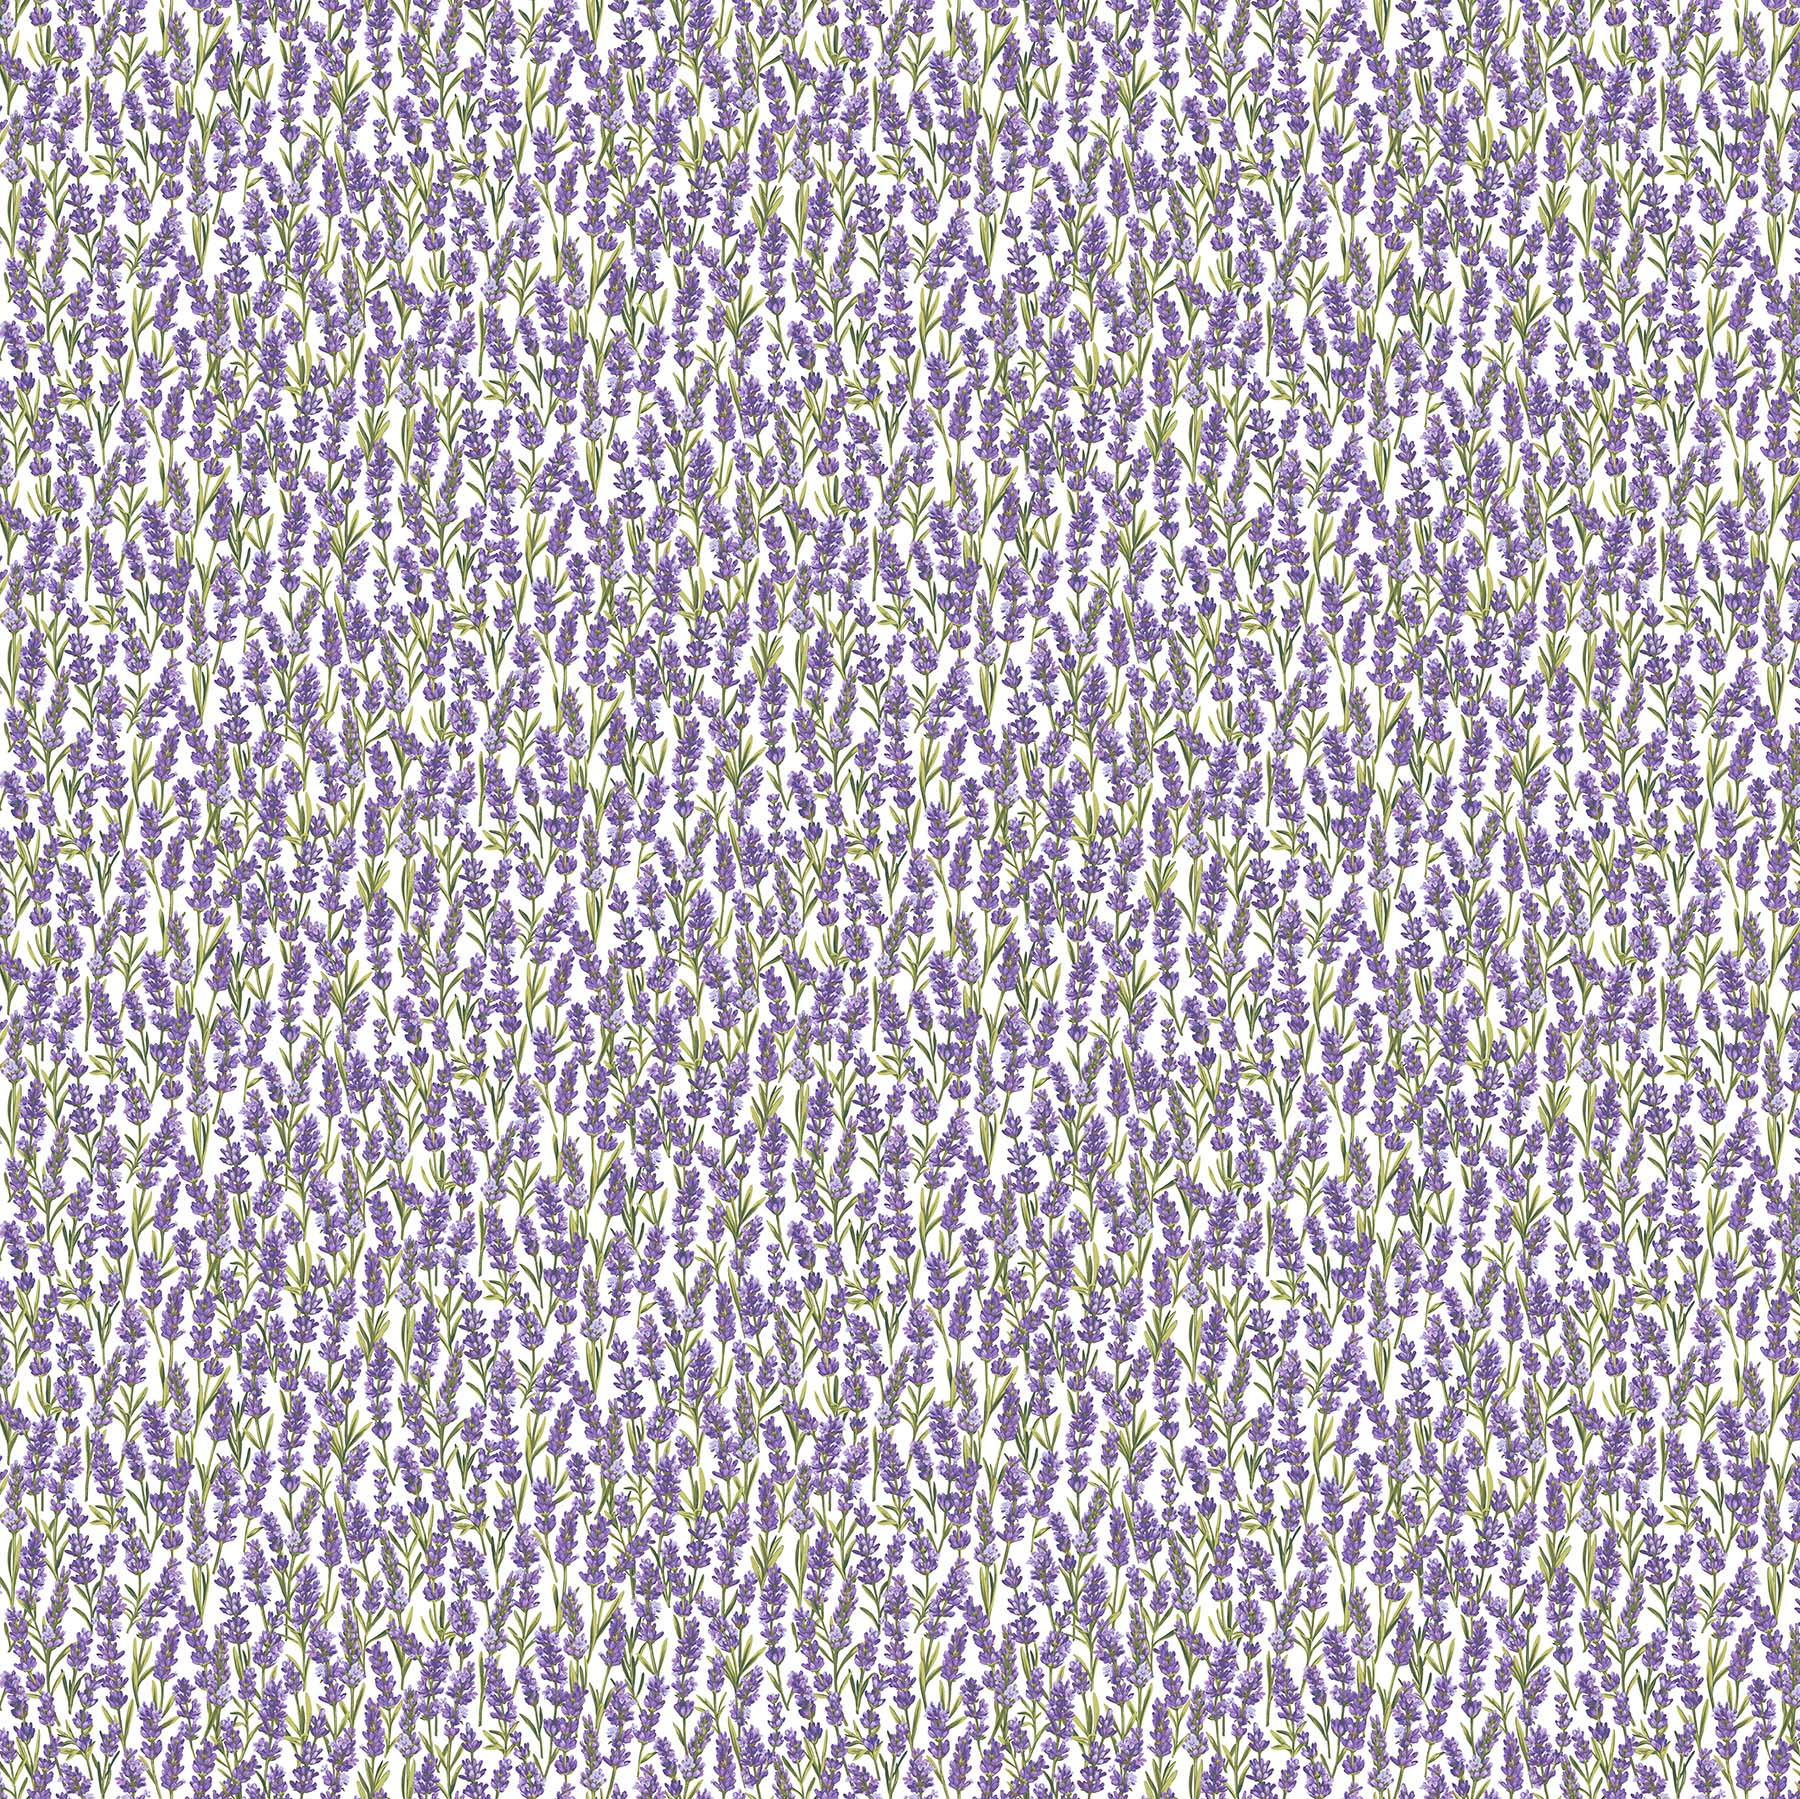 Lavender Market 100% Cotton Fabric - By the Yard - 24476-10 - Packed Lavender - White Multi